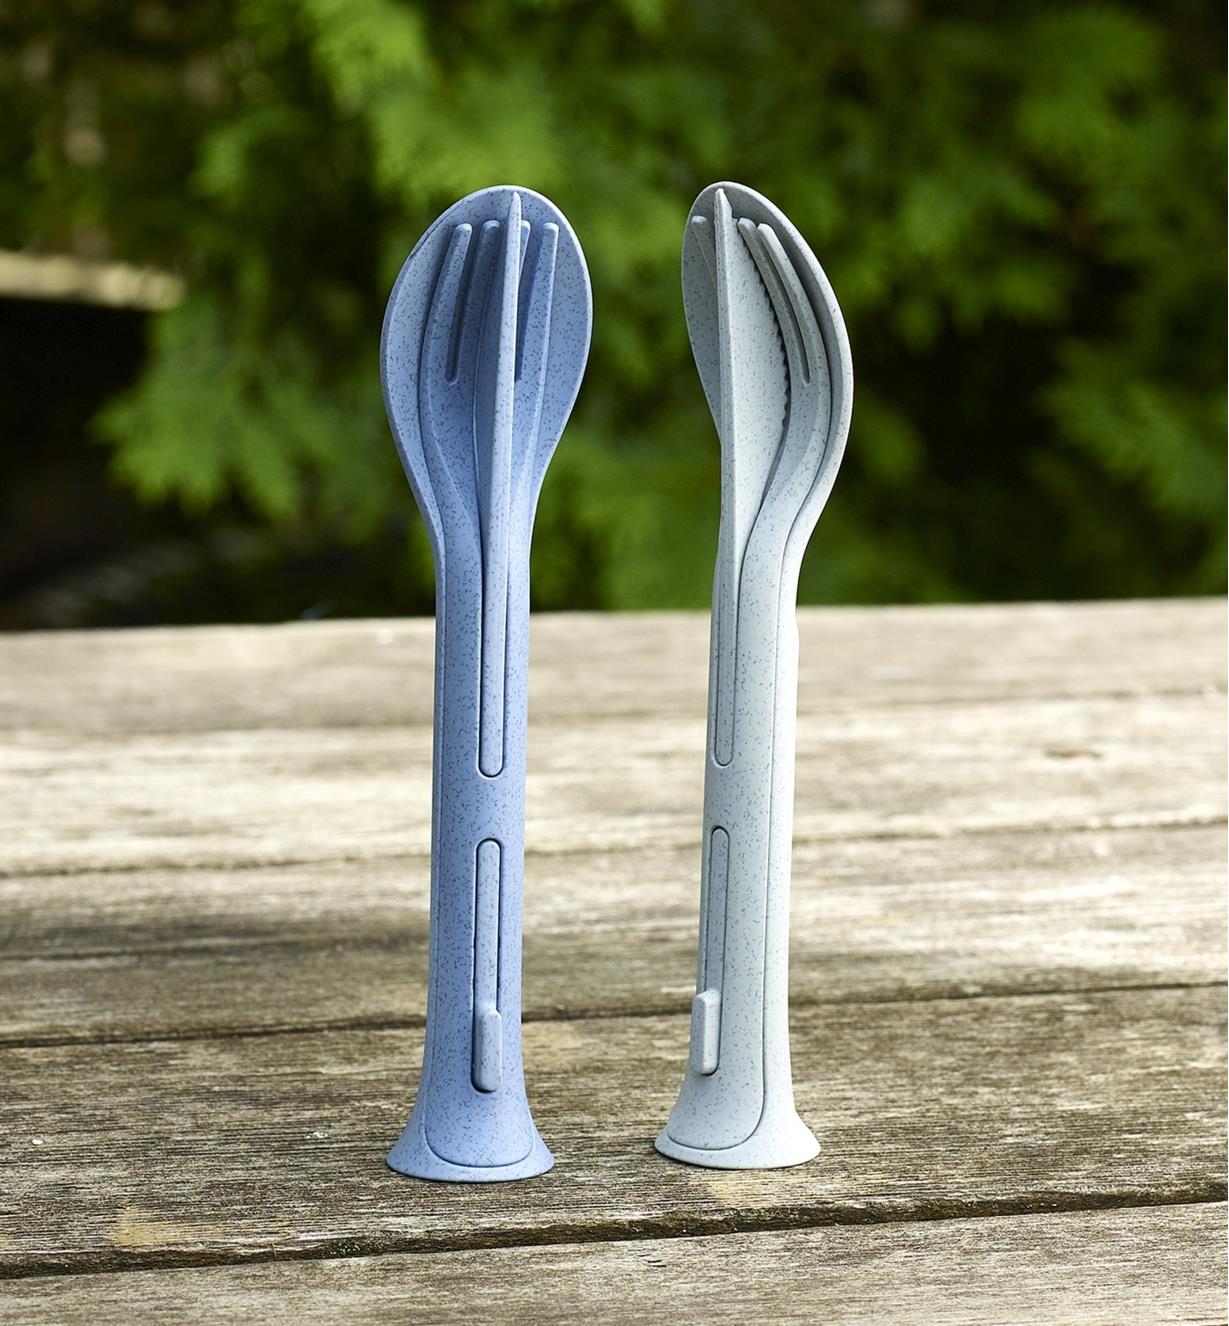 Blue and gray Klikk small cutlery sets standing upright on a picnic table